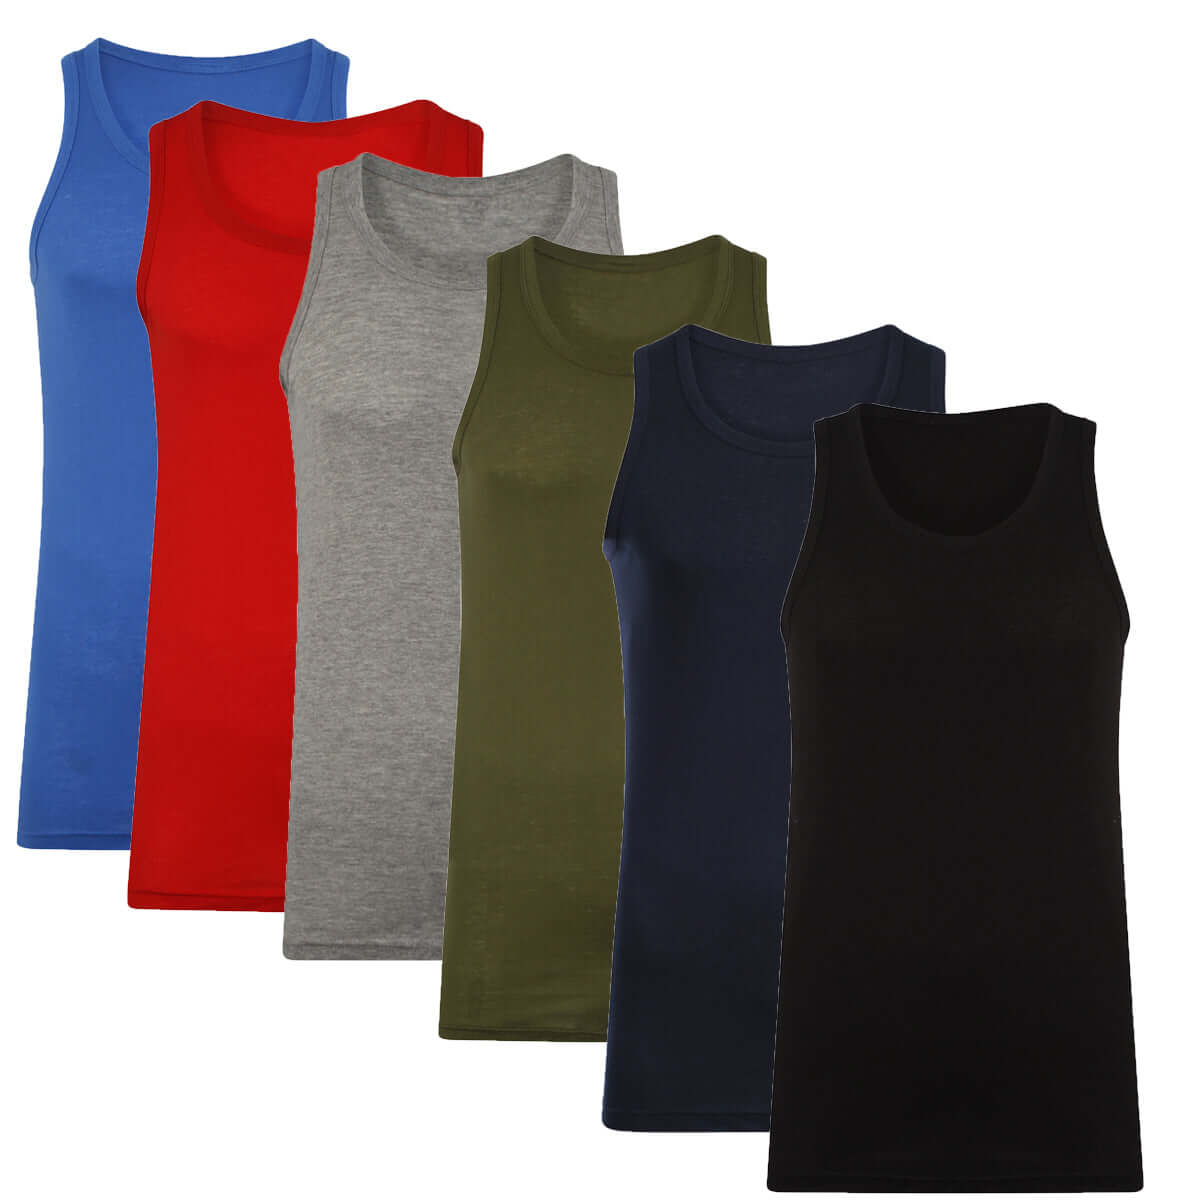 Pack of 6 Men's Vest Fitted Plain 100% Cotton Muscle Gym Summer Top Vests. Buy now for £10.00. A Vests by Sock Stack. assorted, athletics, boys, breathable, clothing, comfortable, cotton, dressing, gym, home, medium, mens, outdoor, small, soft, sports, su